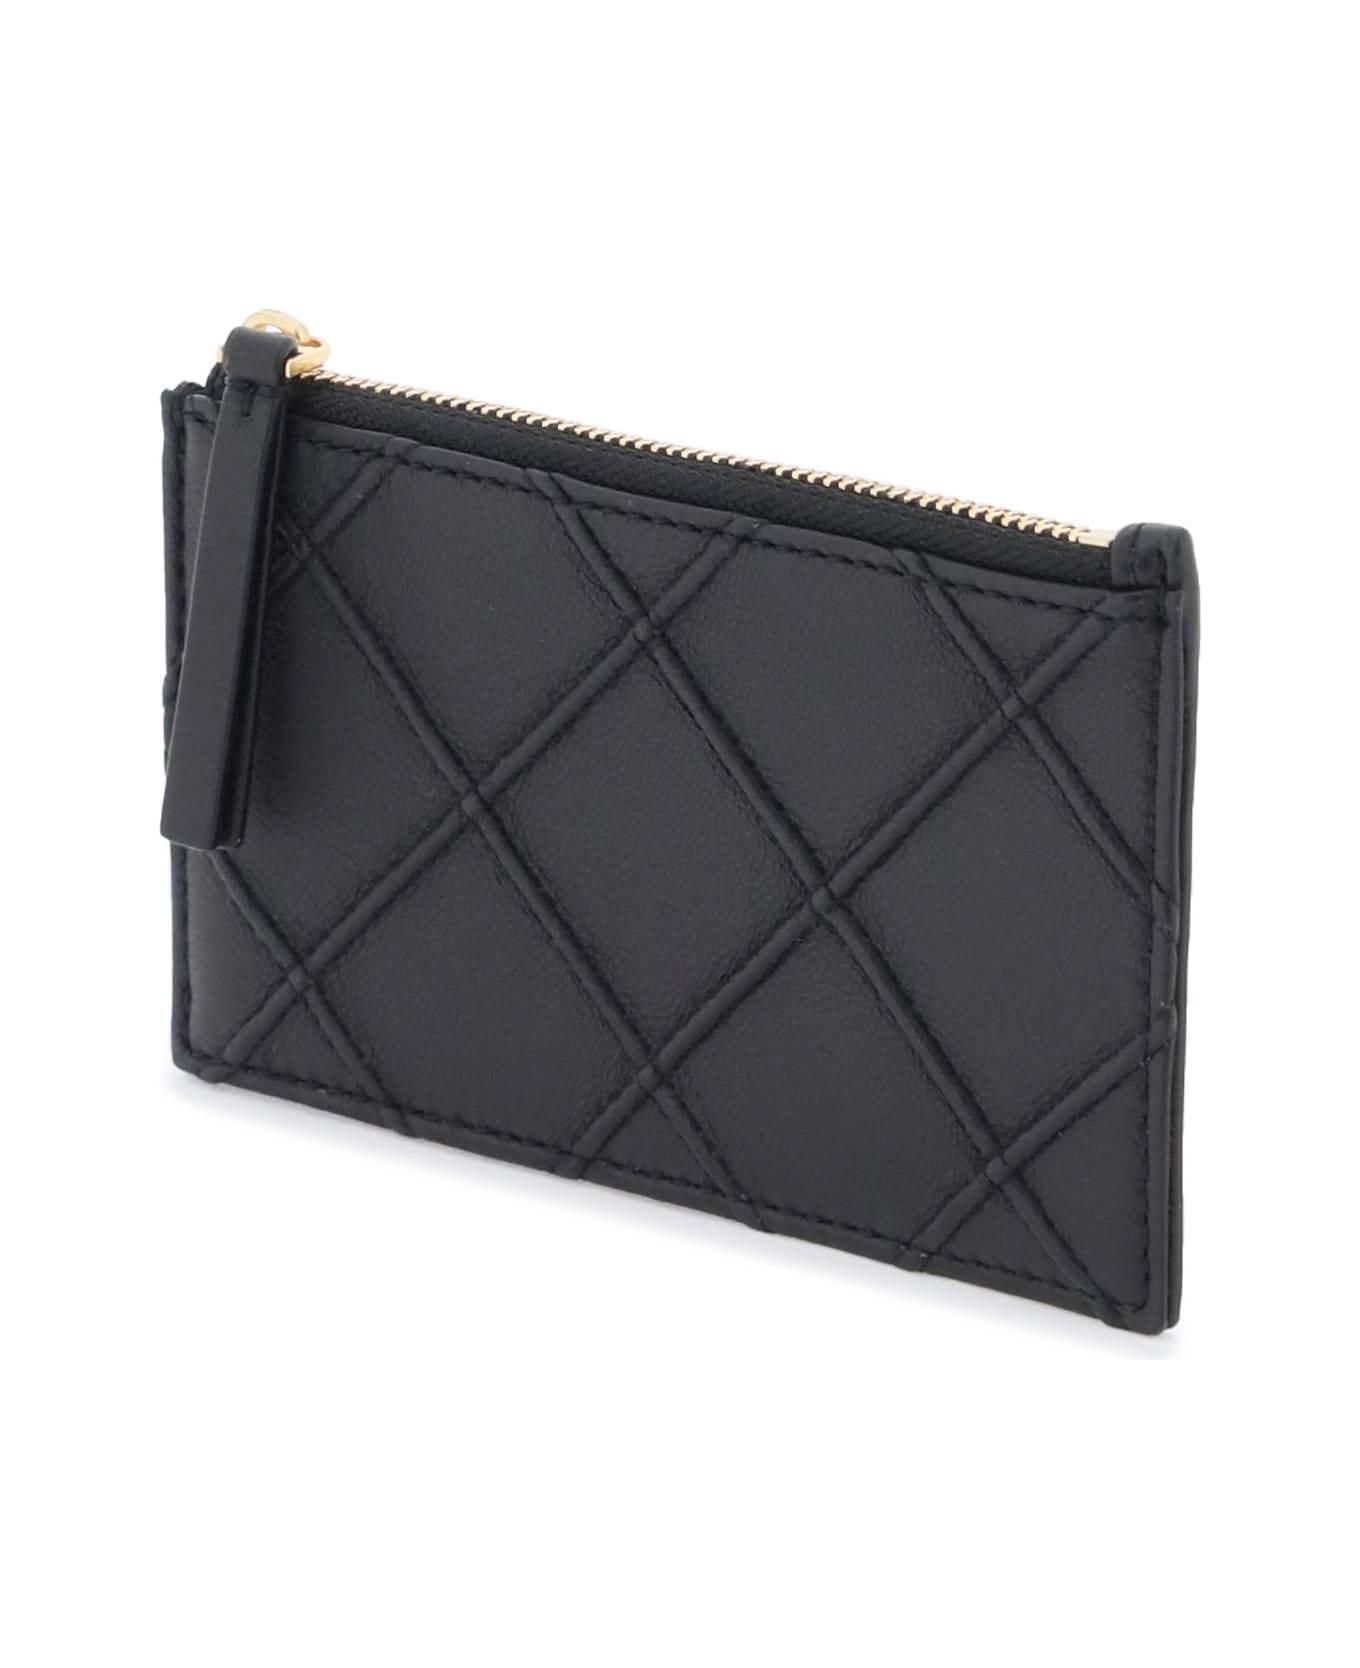 Tory Burch Smooth Leather Card Holder - Black 財布